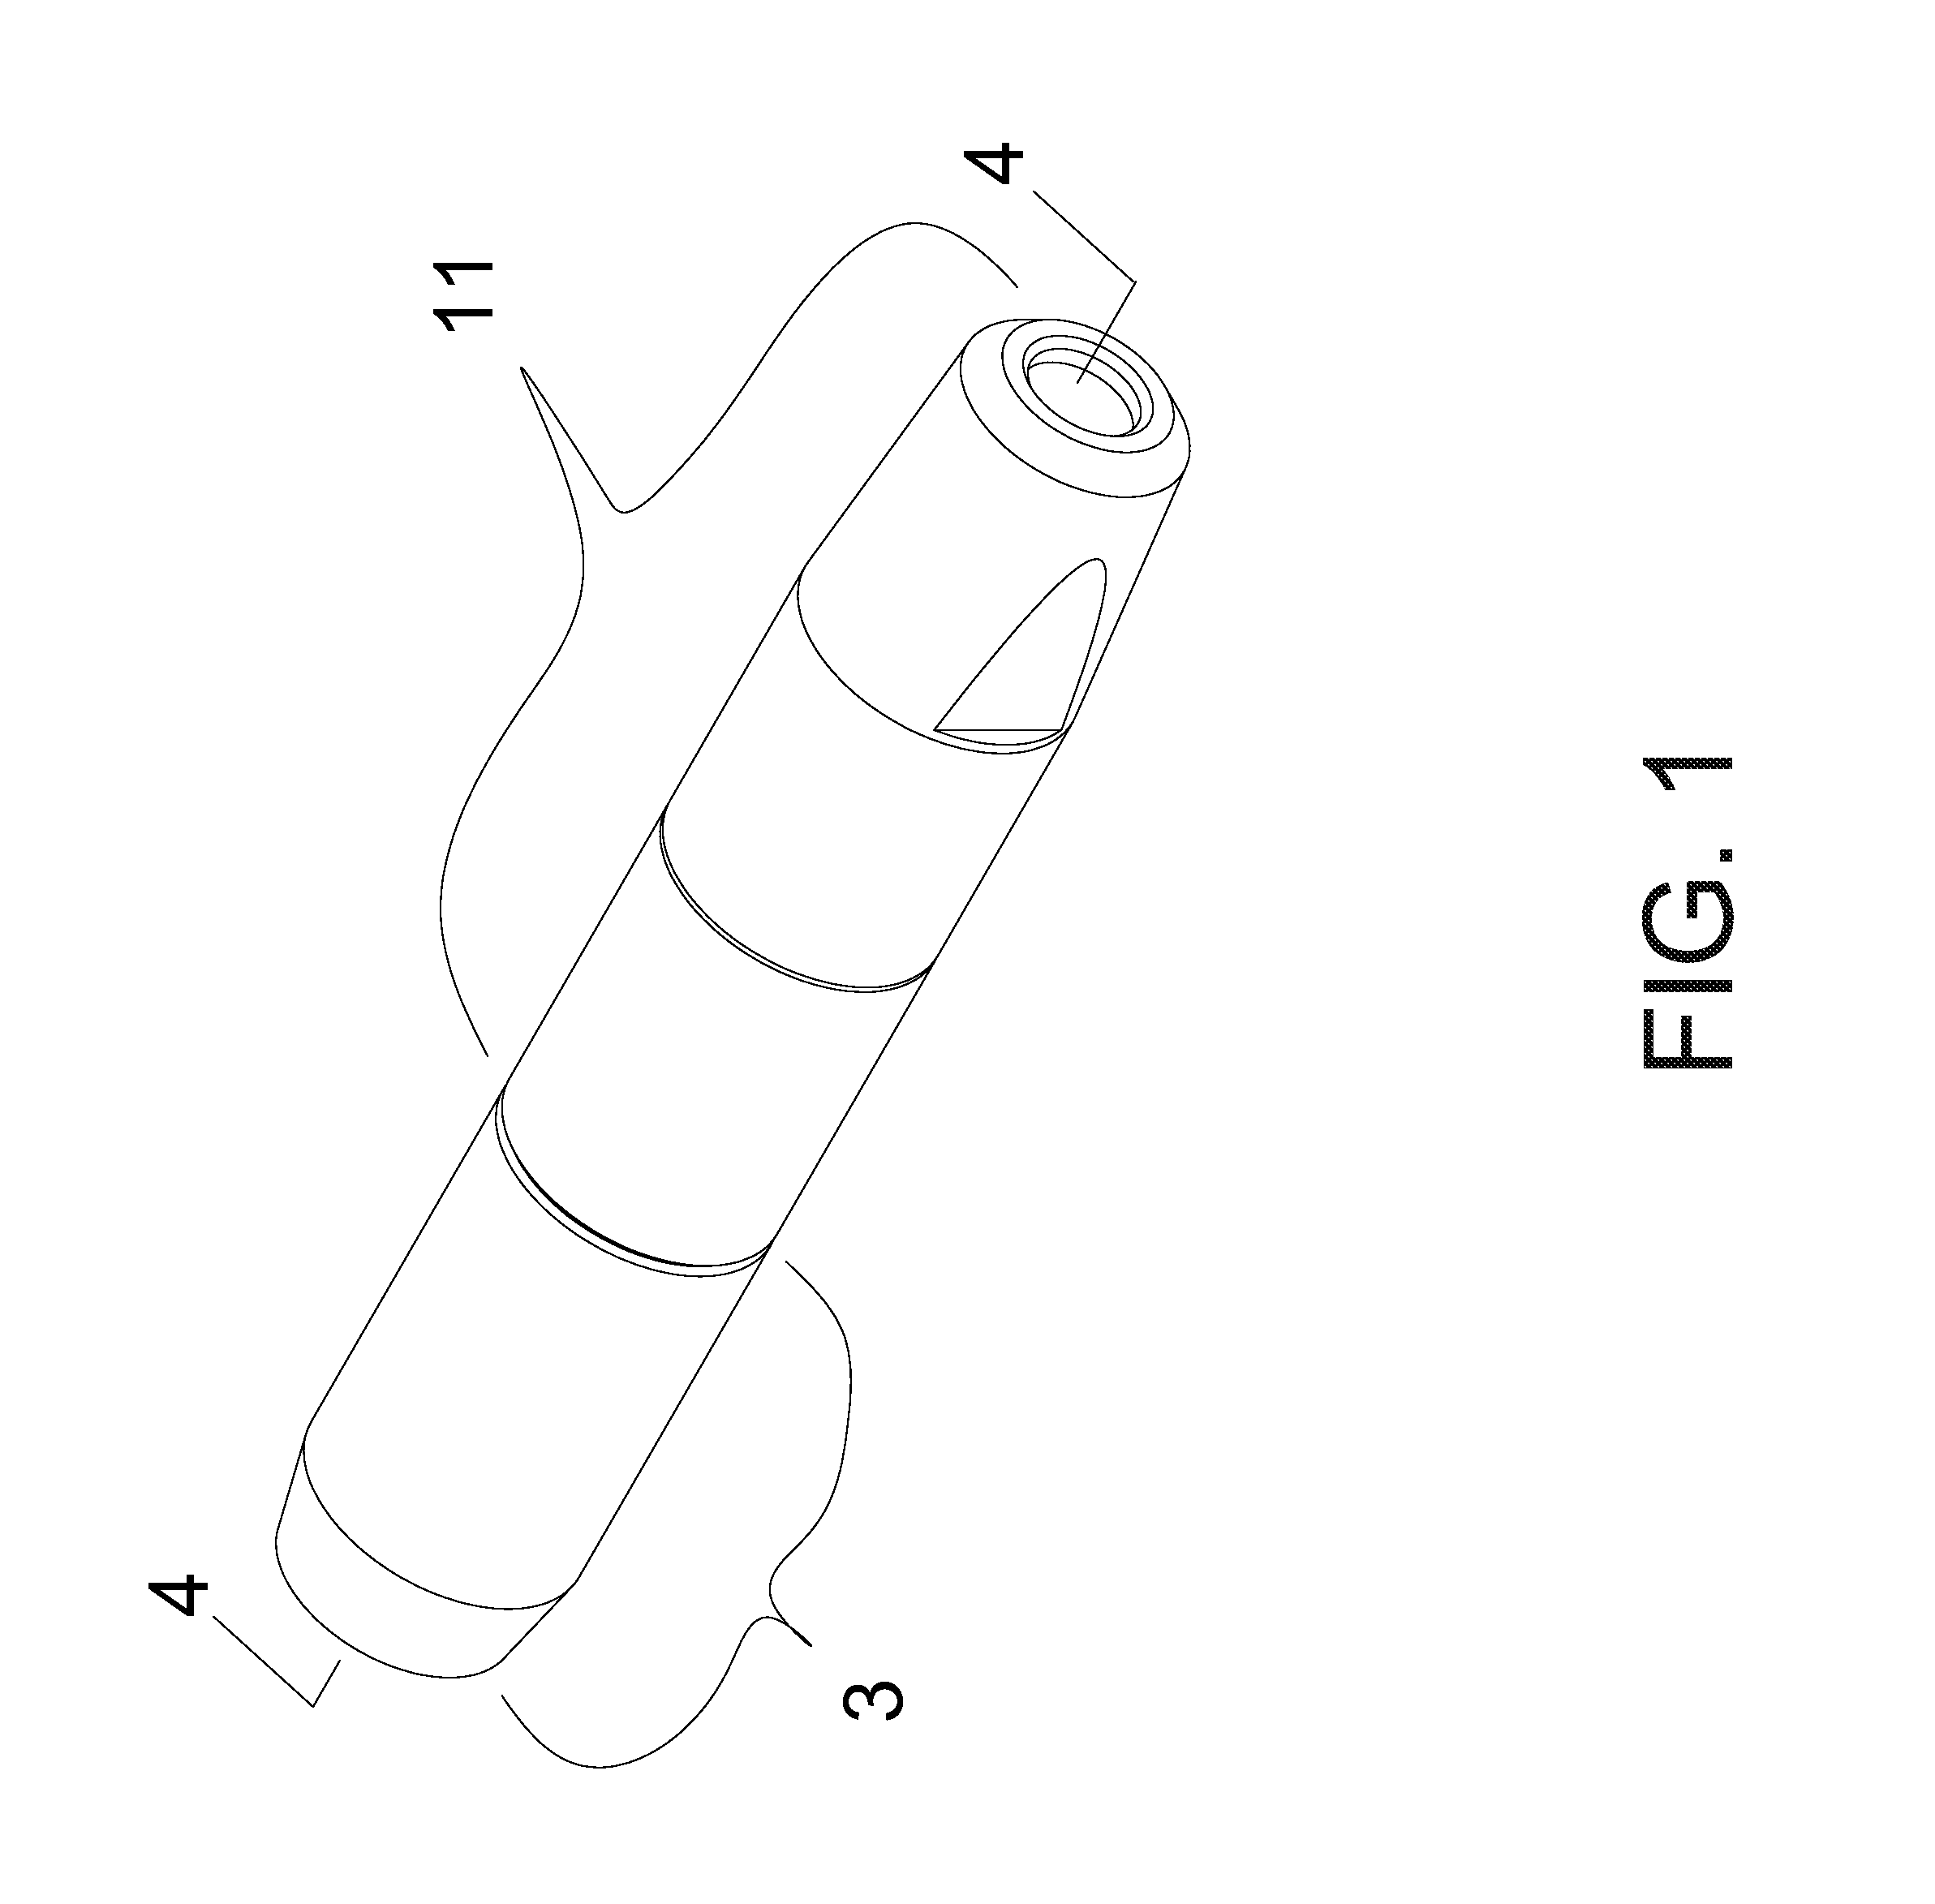 Interchangeable Self-Locking Spring Loaded Quick Connect Apparatus For Wire Rope Cable and The Like